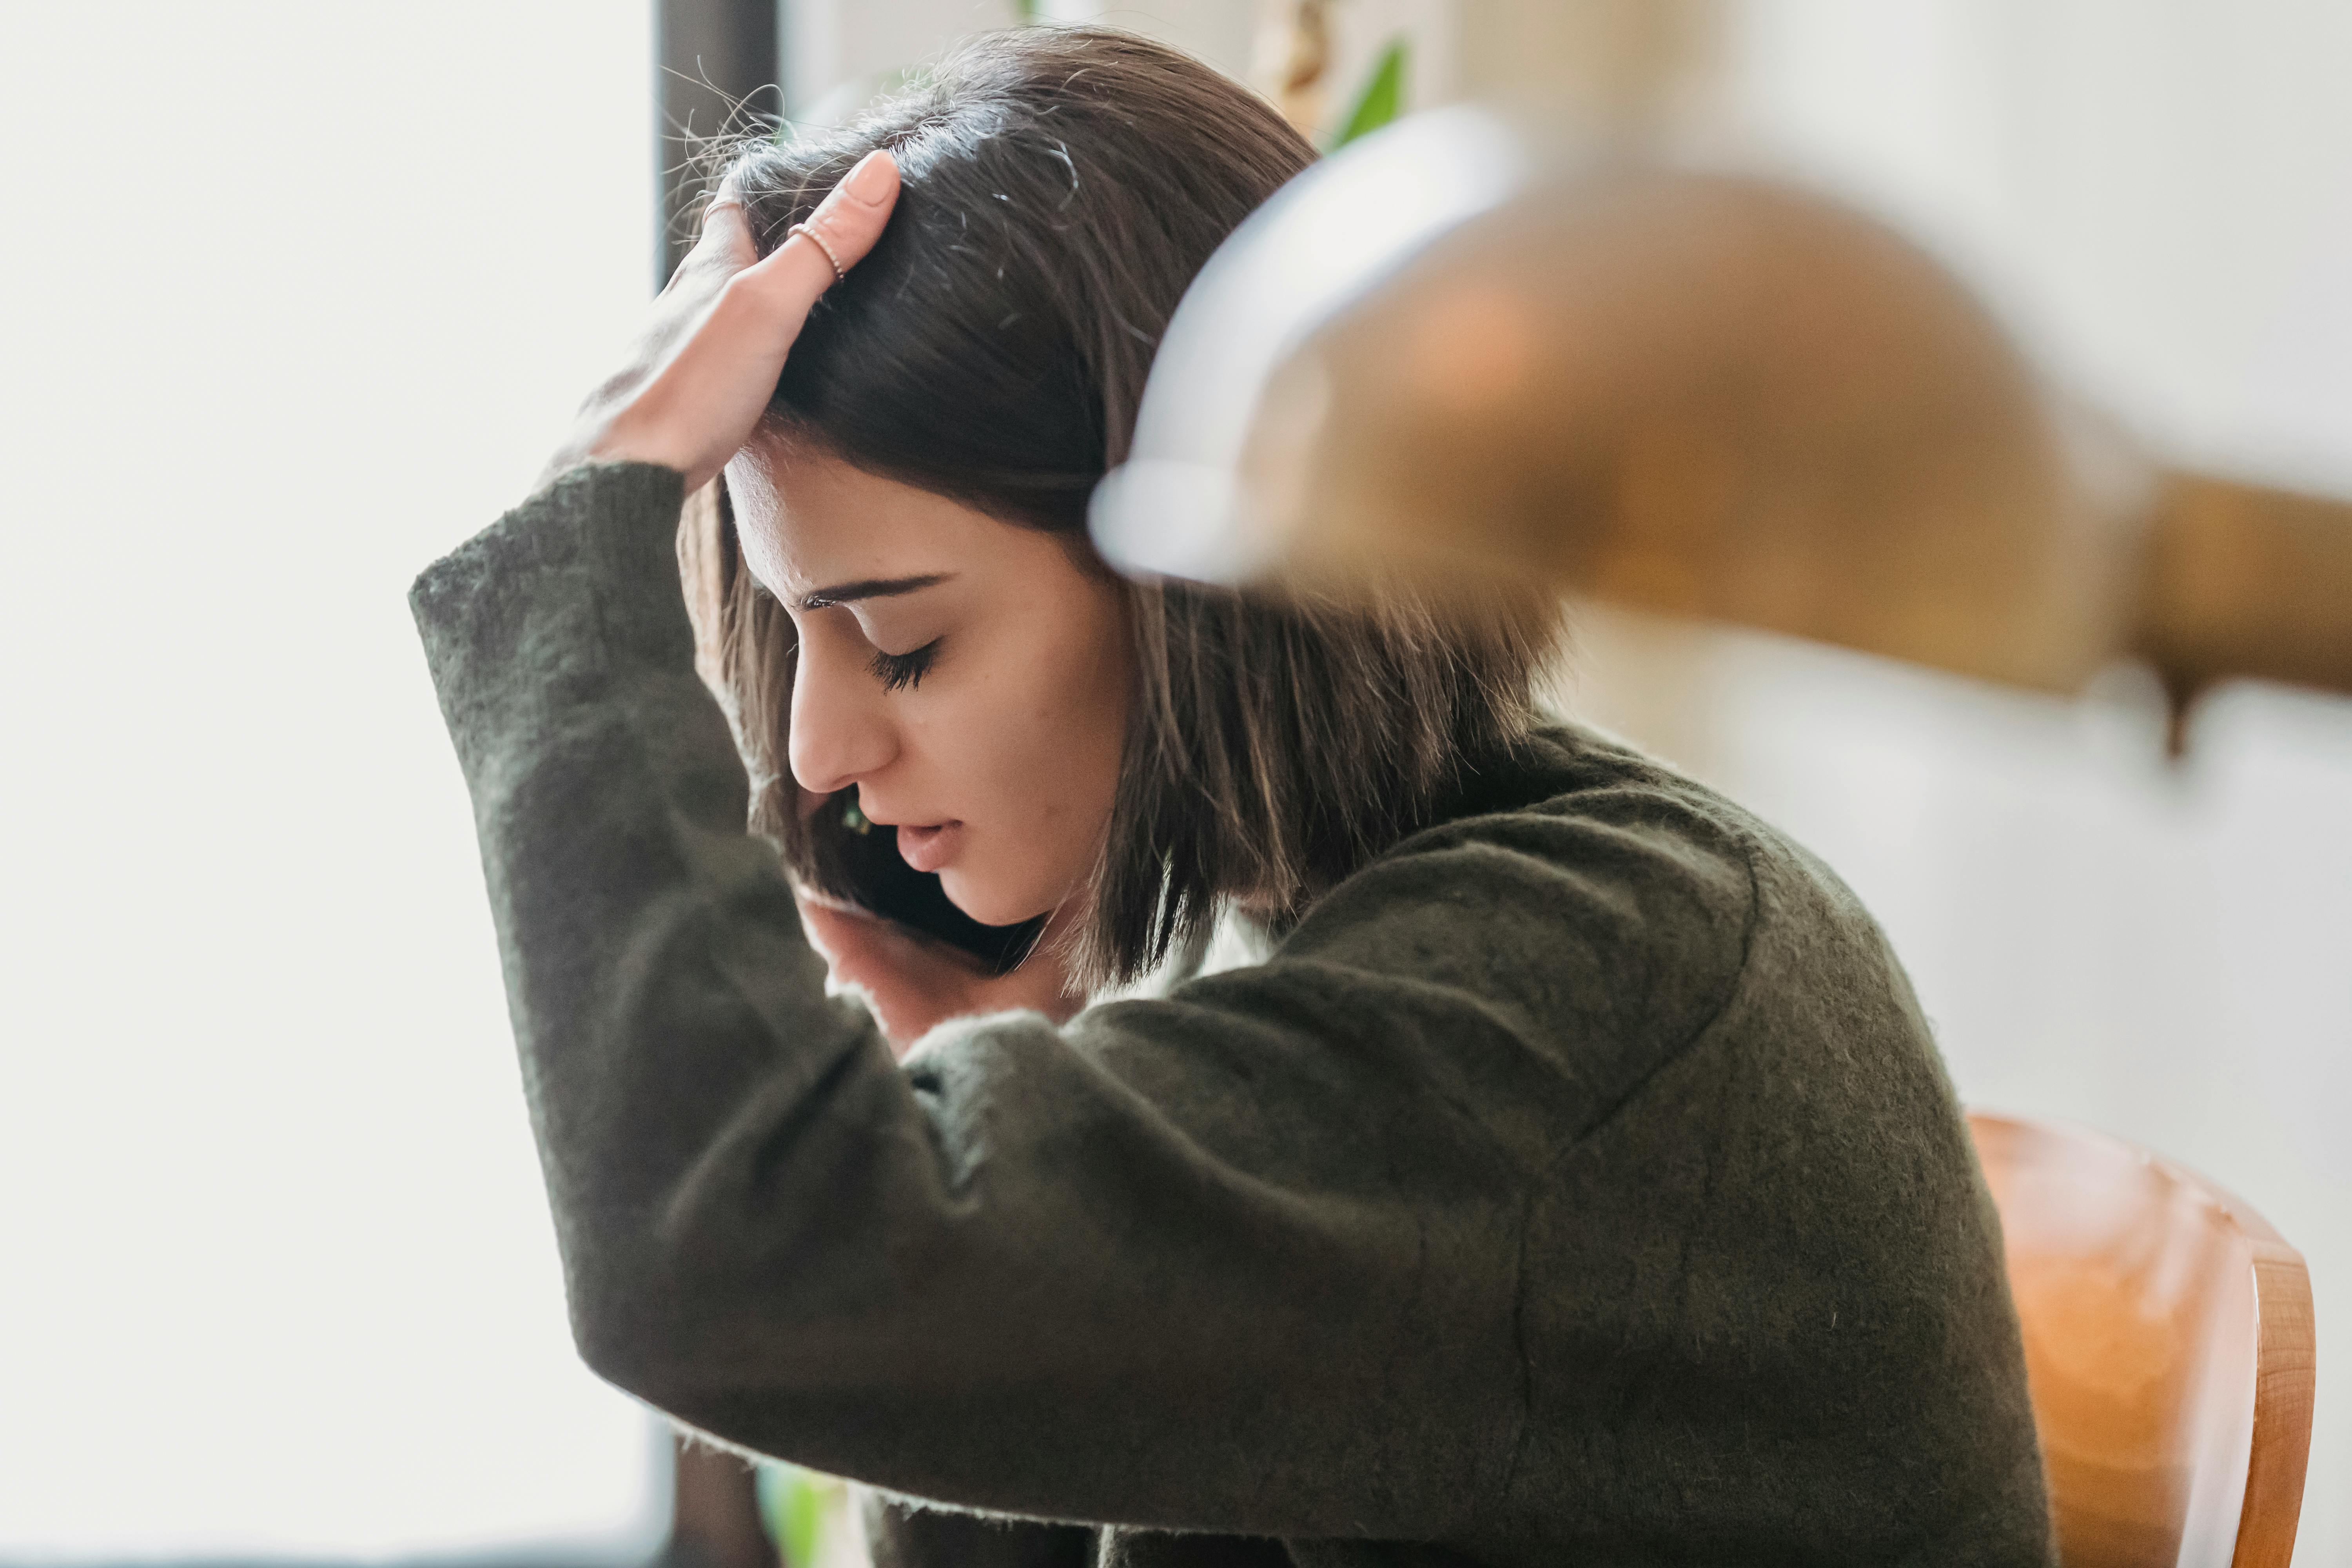 A young woman touching her head while talking on the phone | Source: Pexels